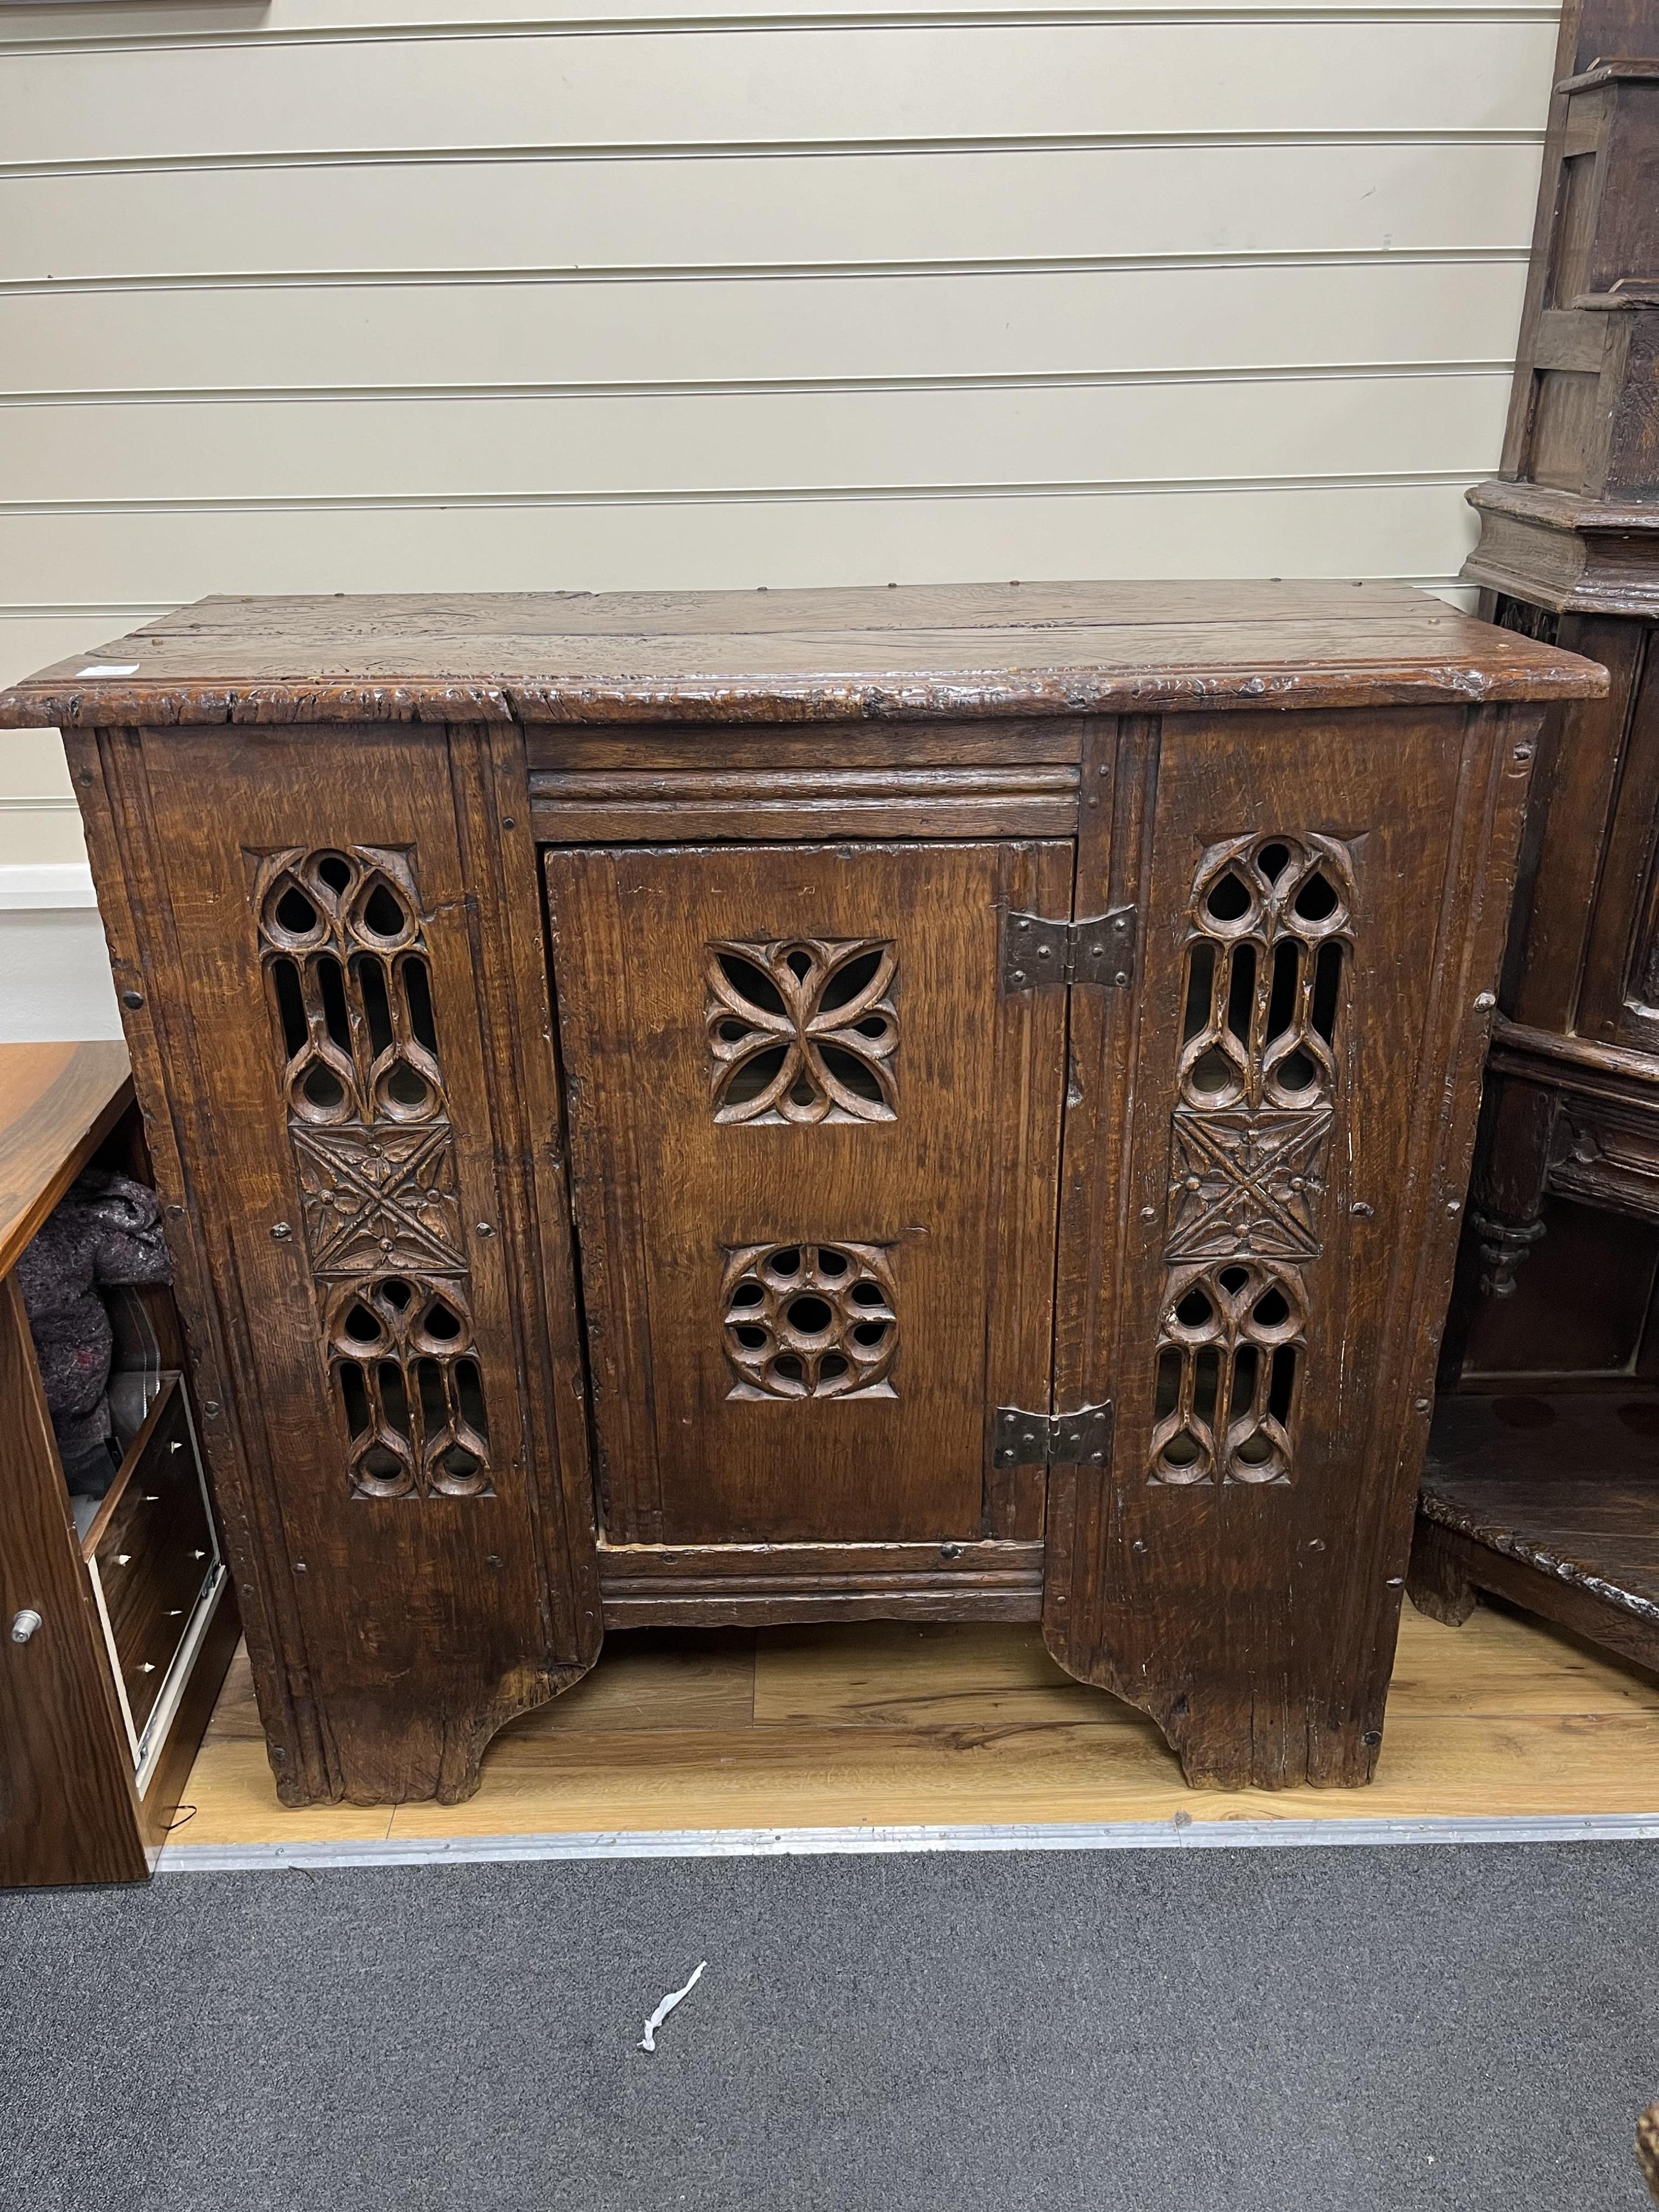 A Gothic boarded oak aumbry, with pierced fretwork panels, in late 15th century style, width 119cm, depth 54cm, height 114cm. Condition - good, Provenance - made for Brede Place, Brede, Rye, East Sussex. Commissioned fro